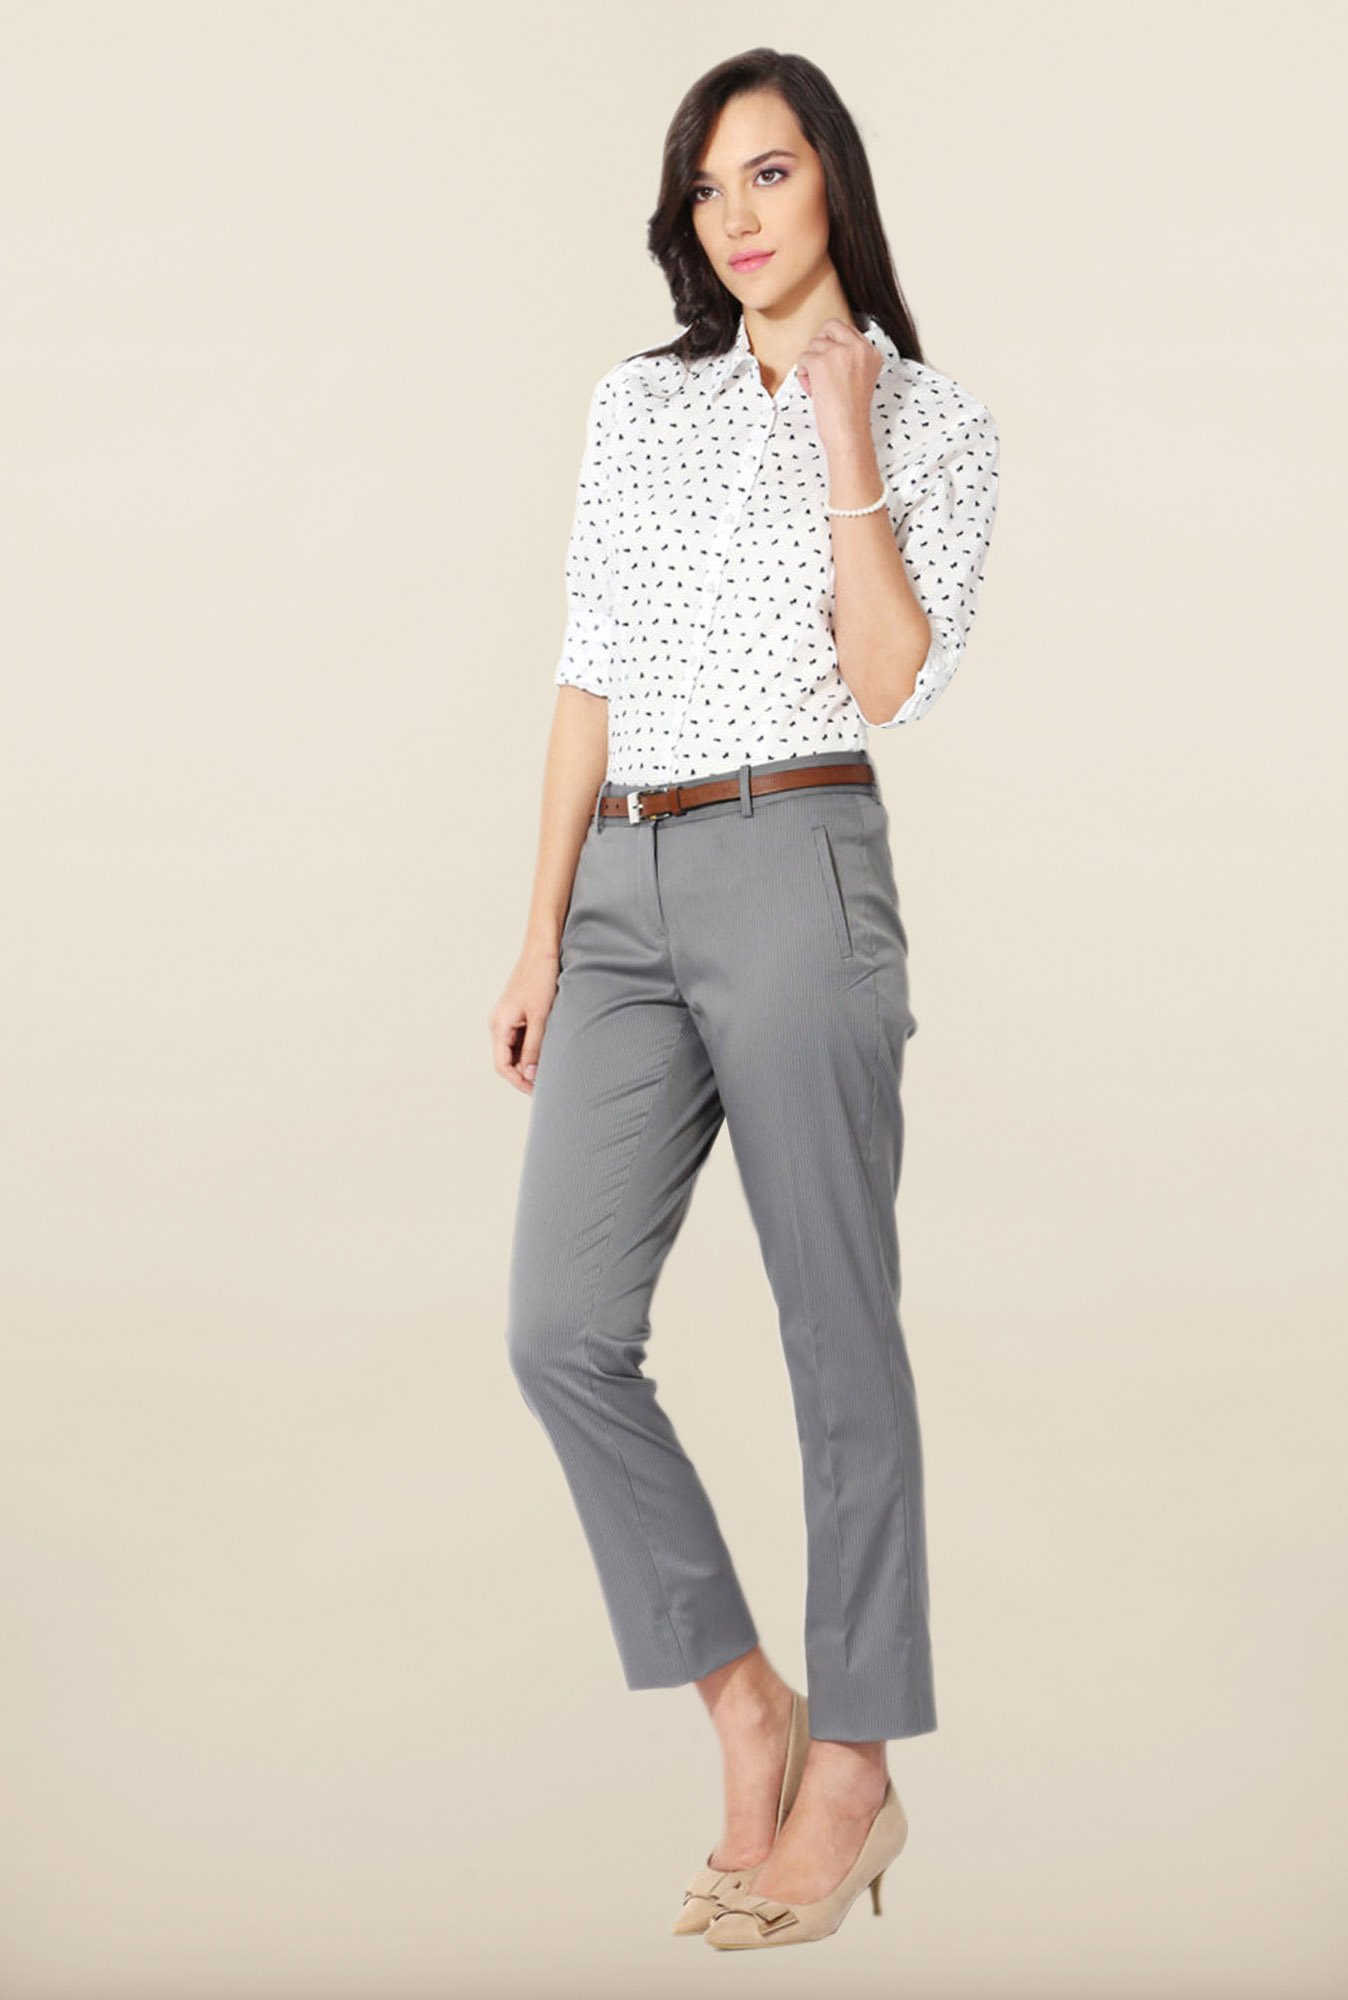 allen solly formal shirts for women